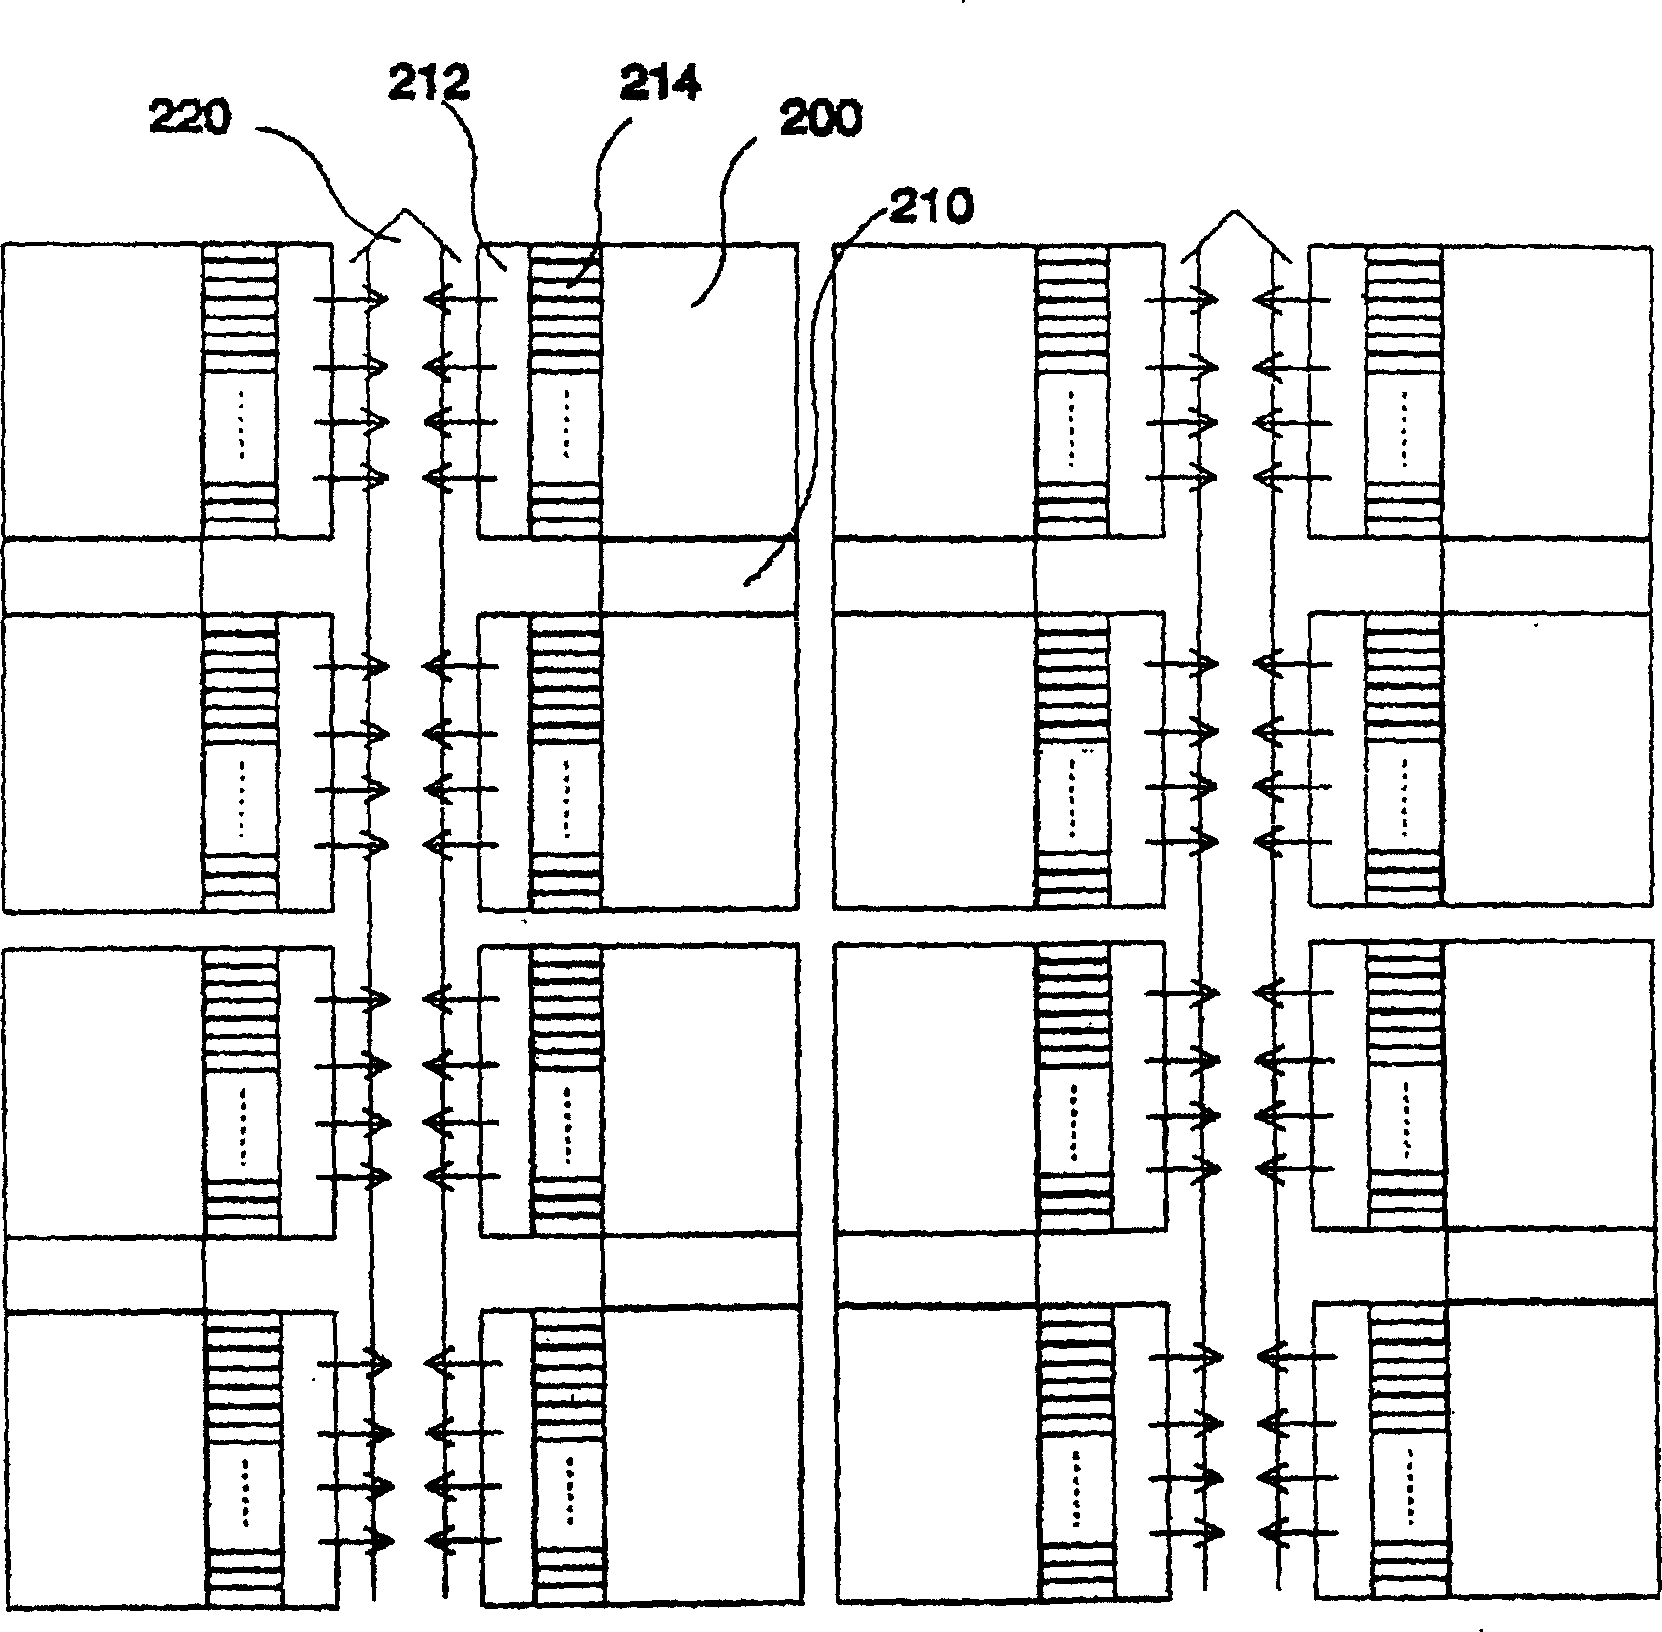 Method for producing embedded DRAM unit array with selected transistor